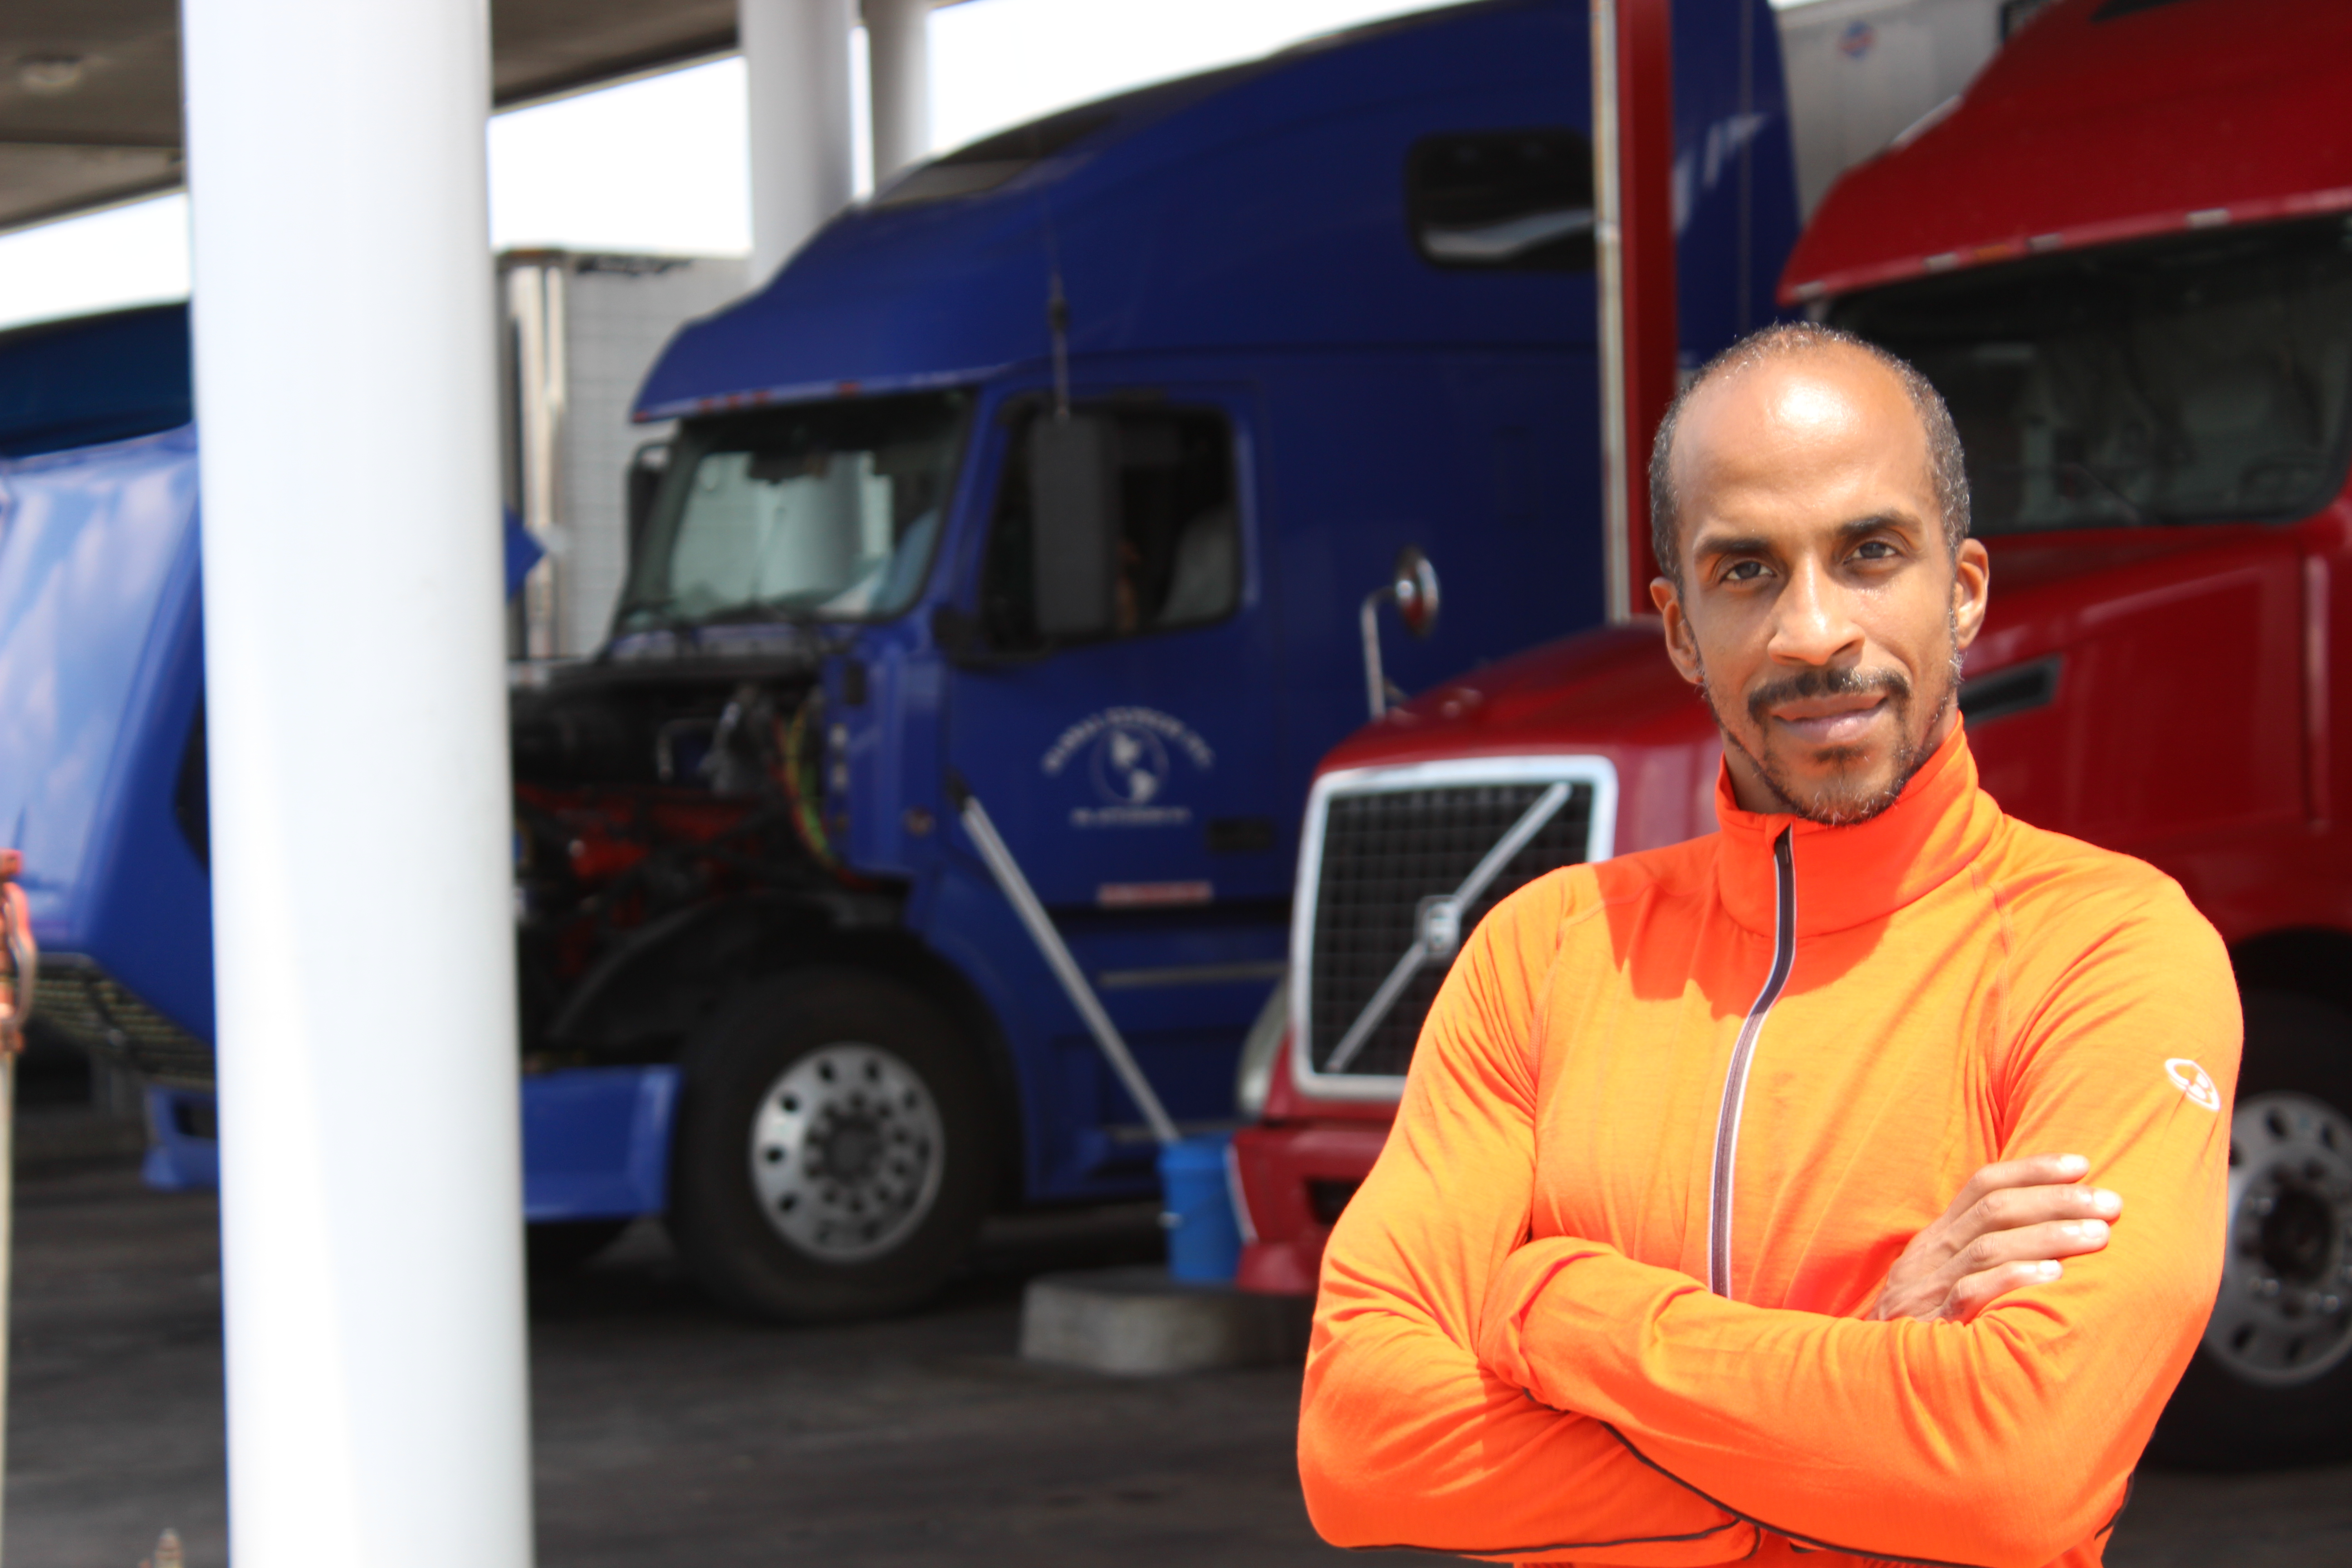 Interview with Siphiwe Baleka, Founder of Fitness Trucking, LLC